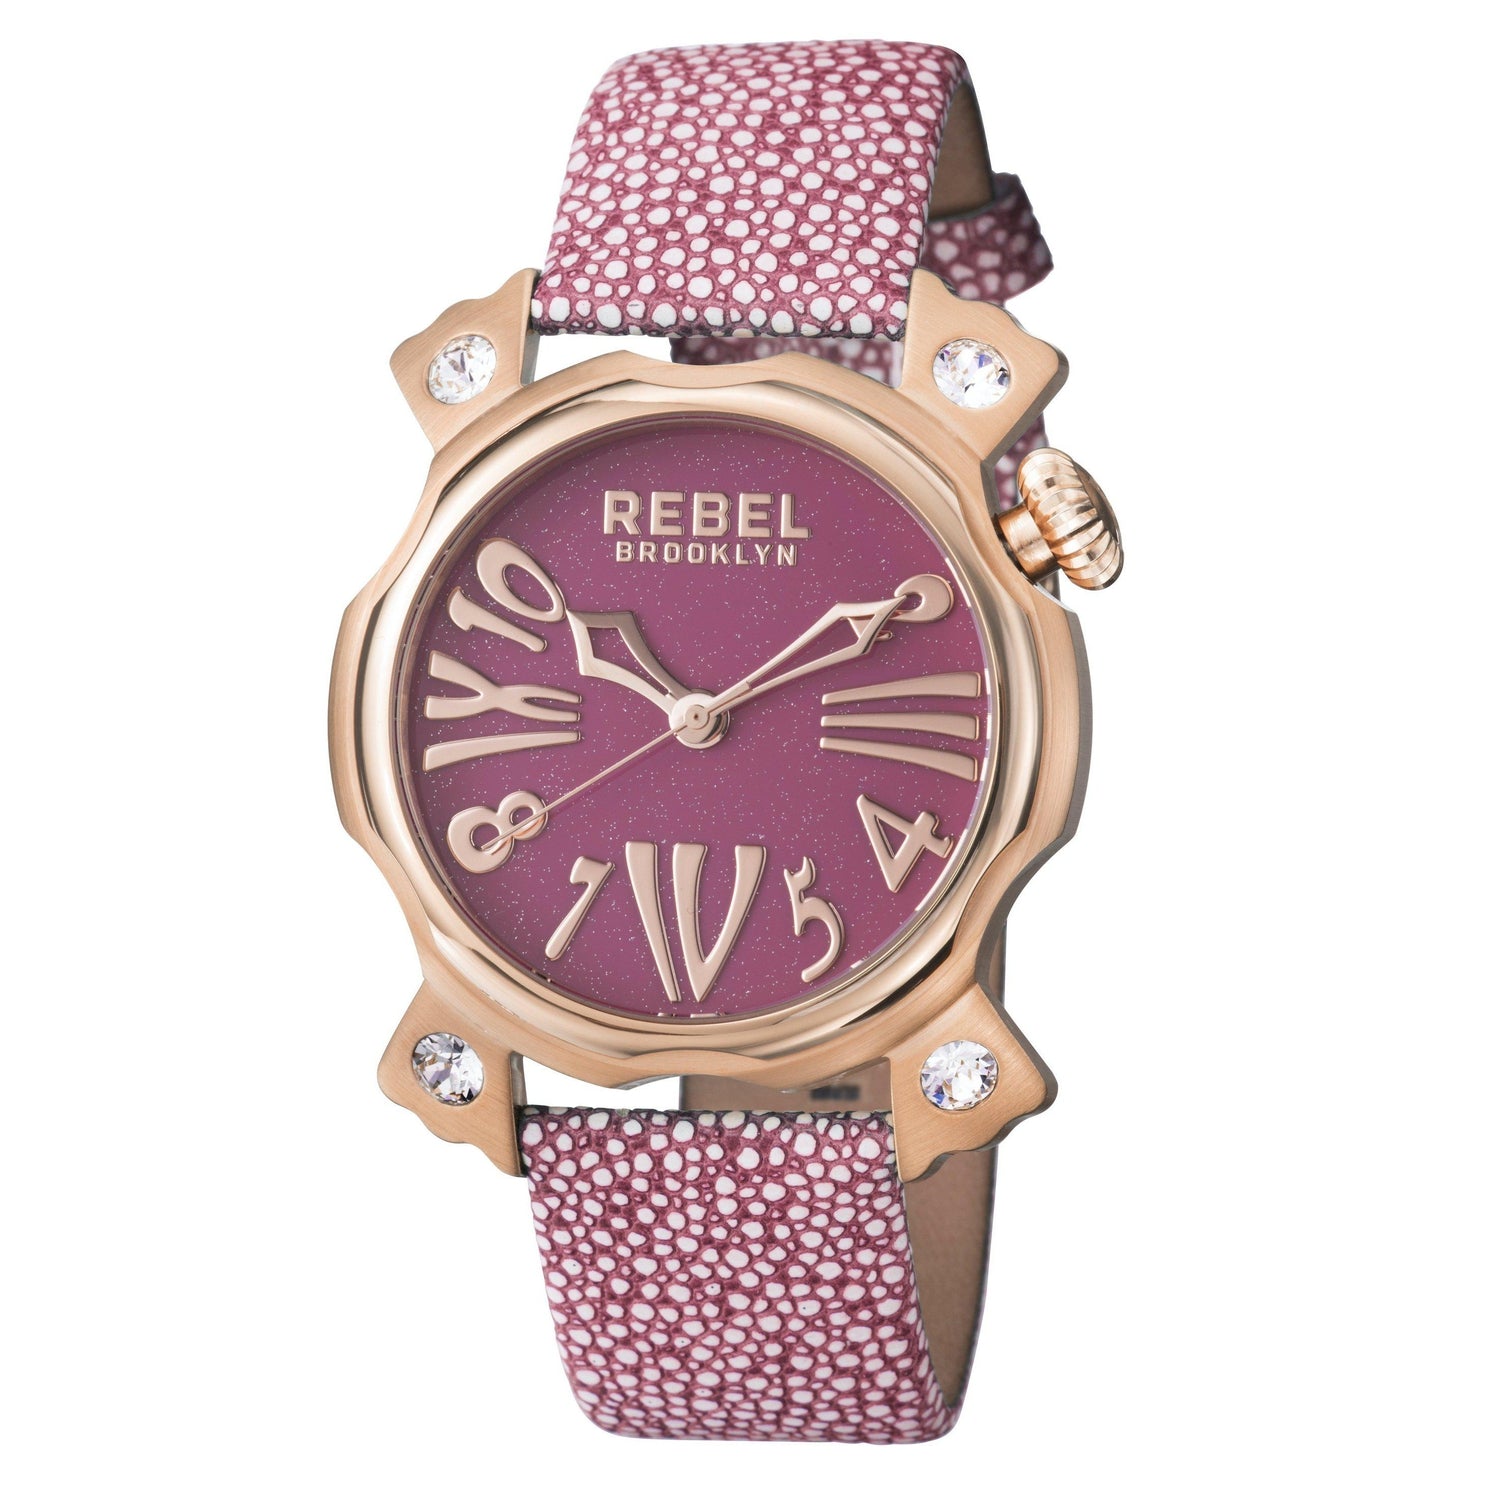 Coney Island Violet Dial Women's Watch-Rebel Brooklyn Watches - RB104-8081 - 